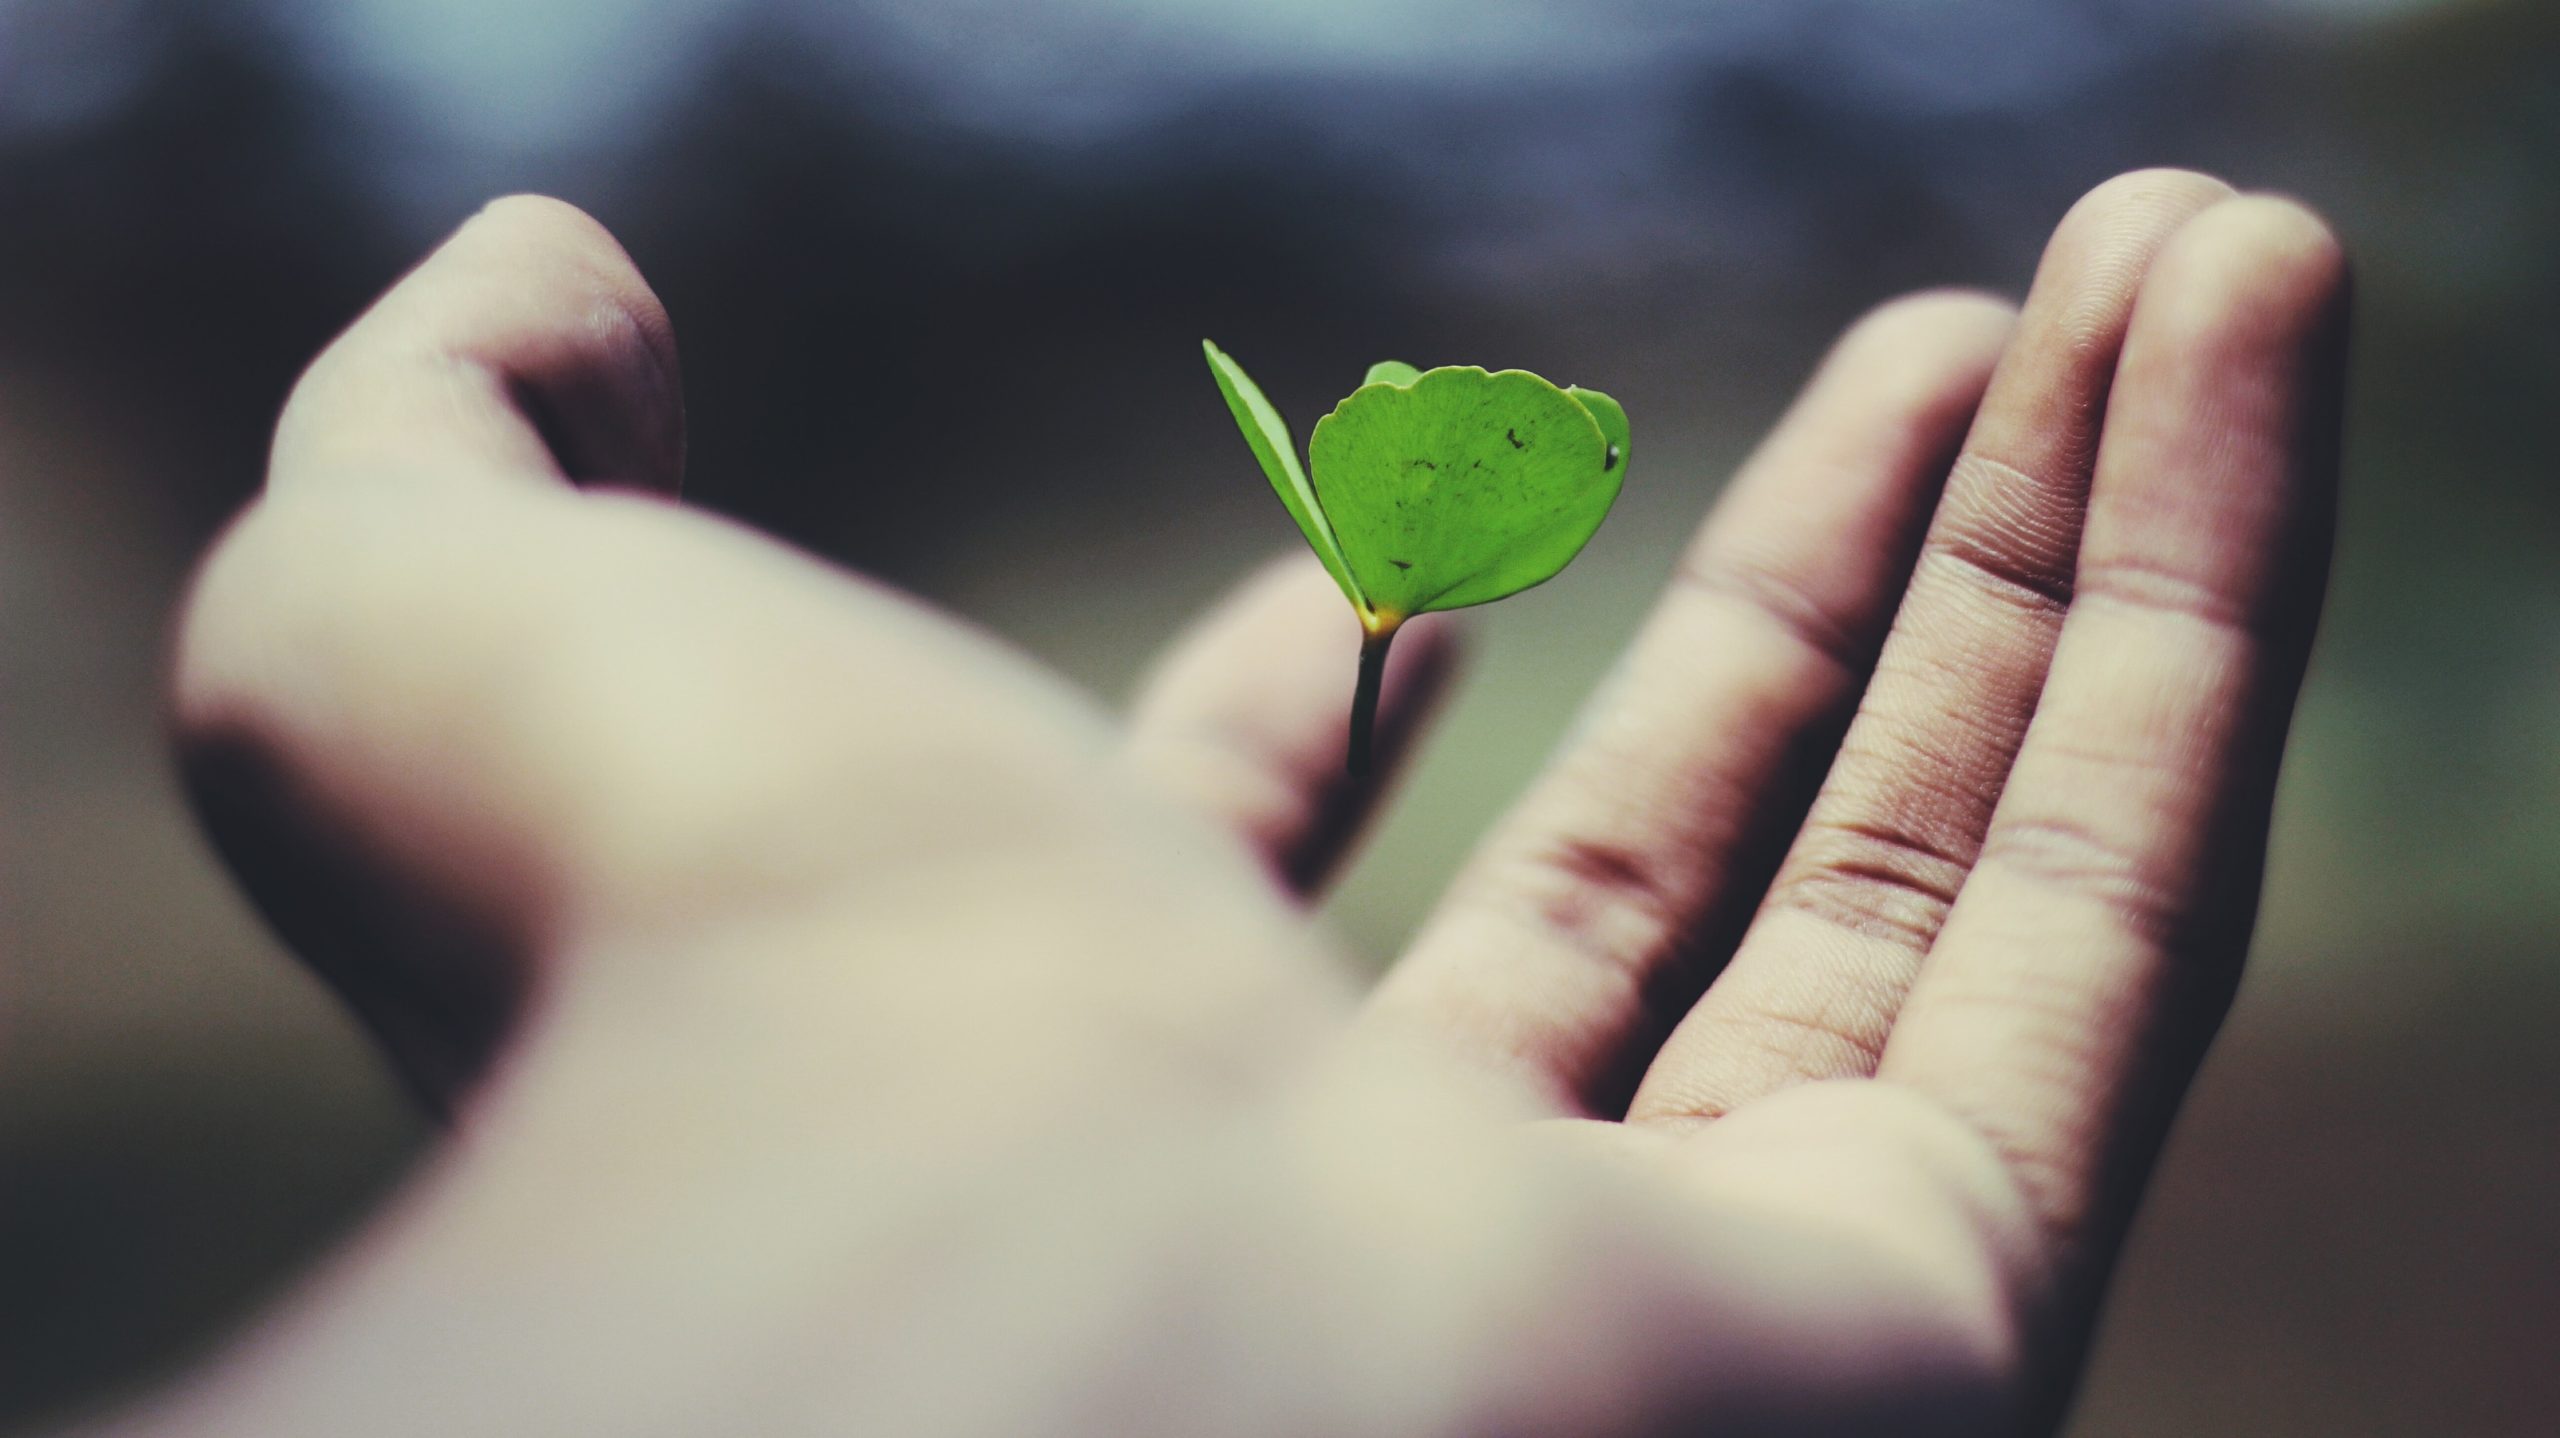 Plant budding in someone's hand. A metaphor for how the right philanthropy insights can help philanthropists' big gifts flourish.